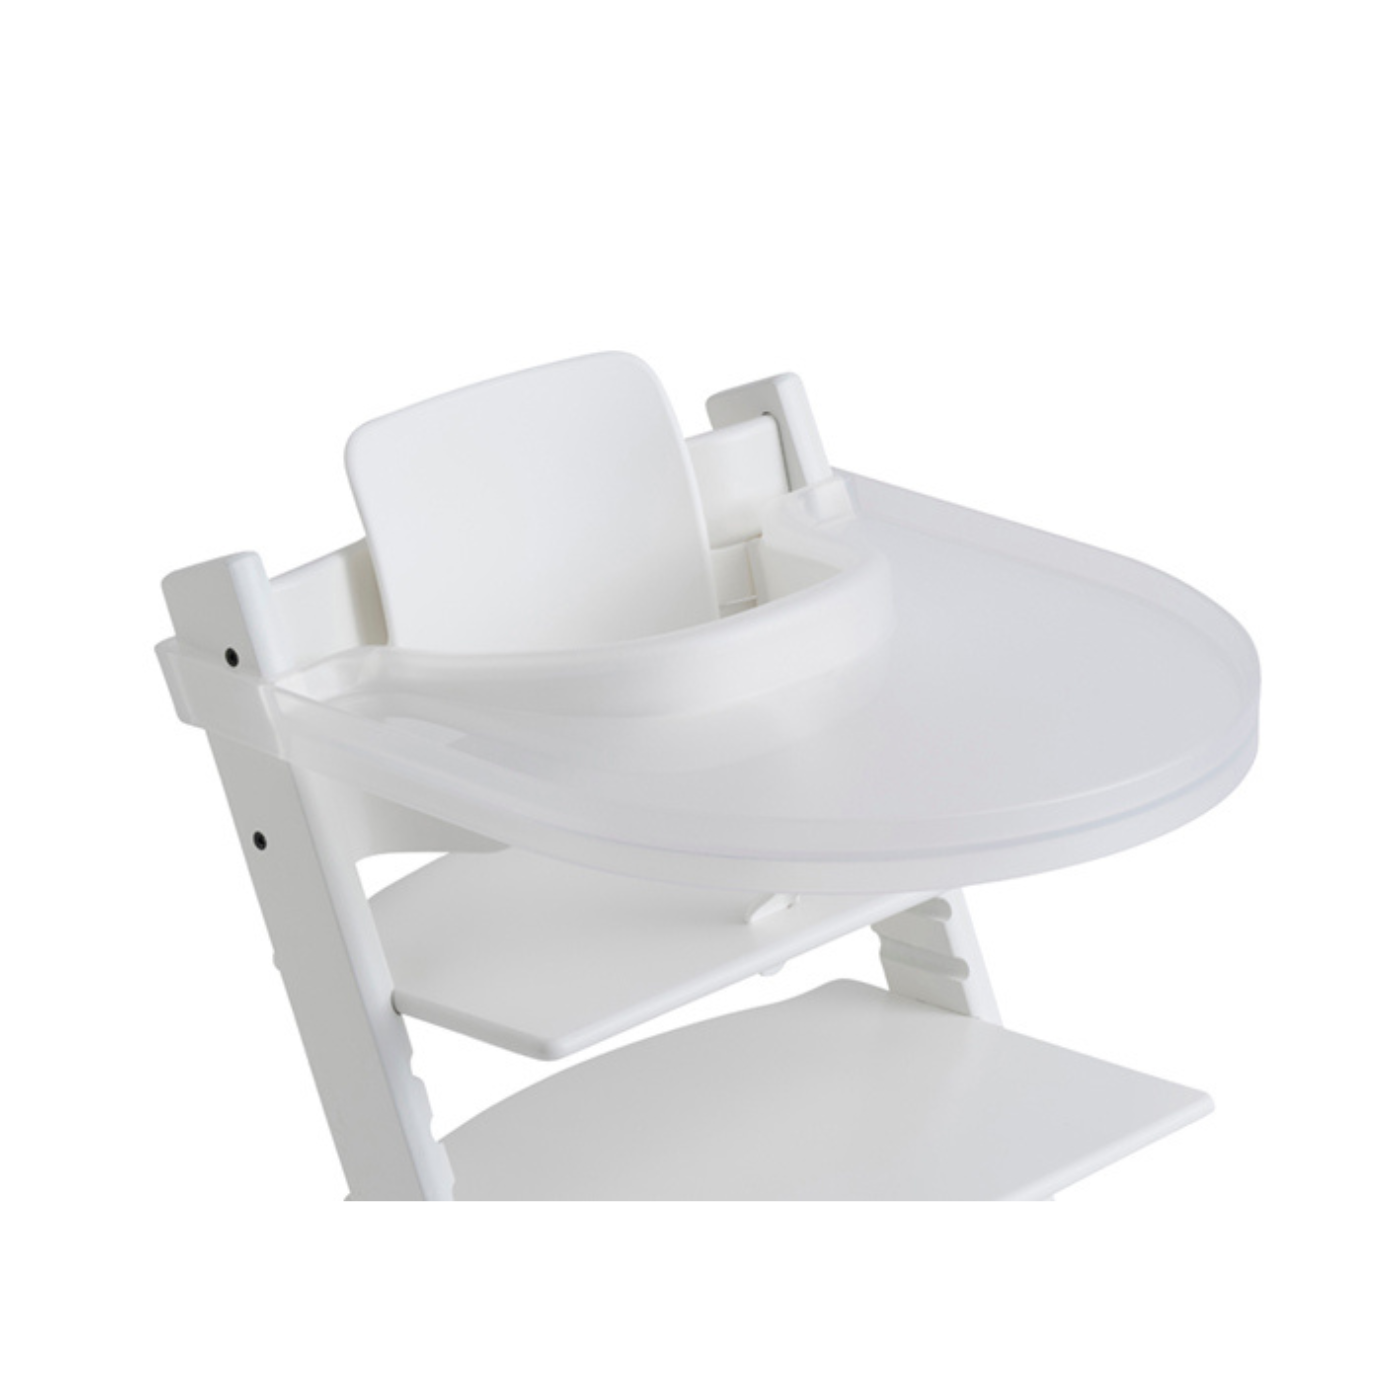 Playtray Tray For Stokke Tripp Trapp Chair – Rebjoorn